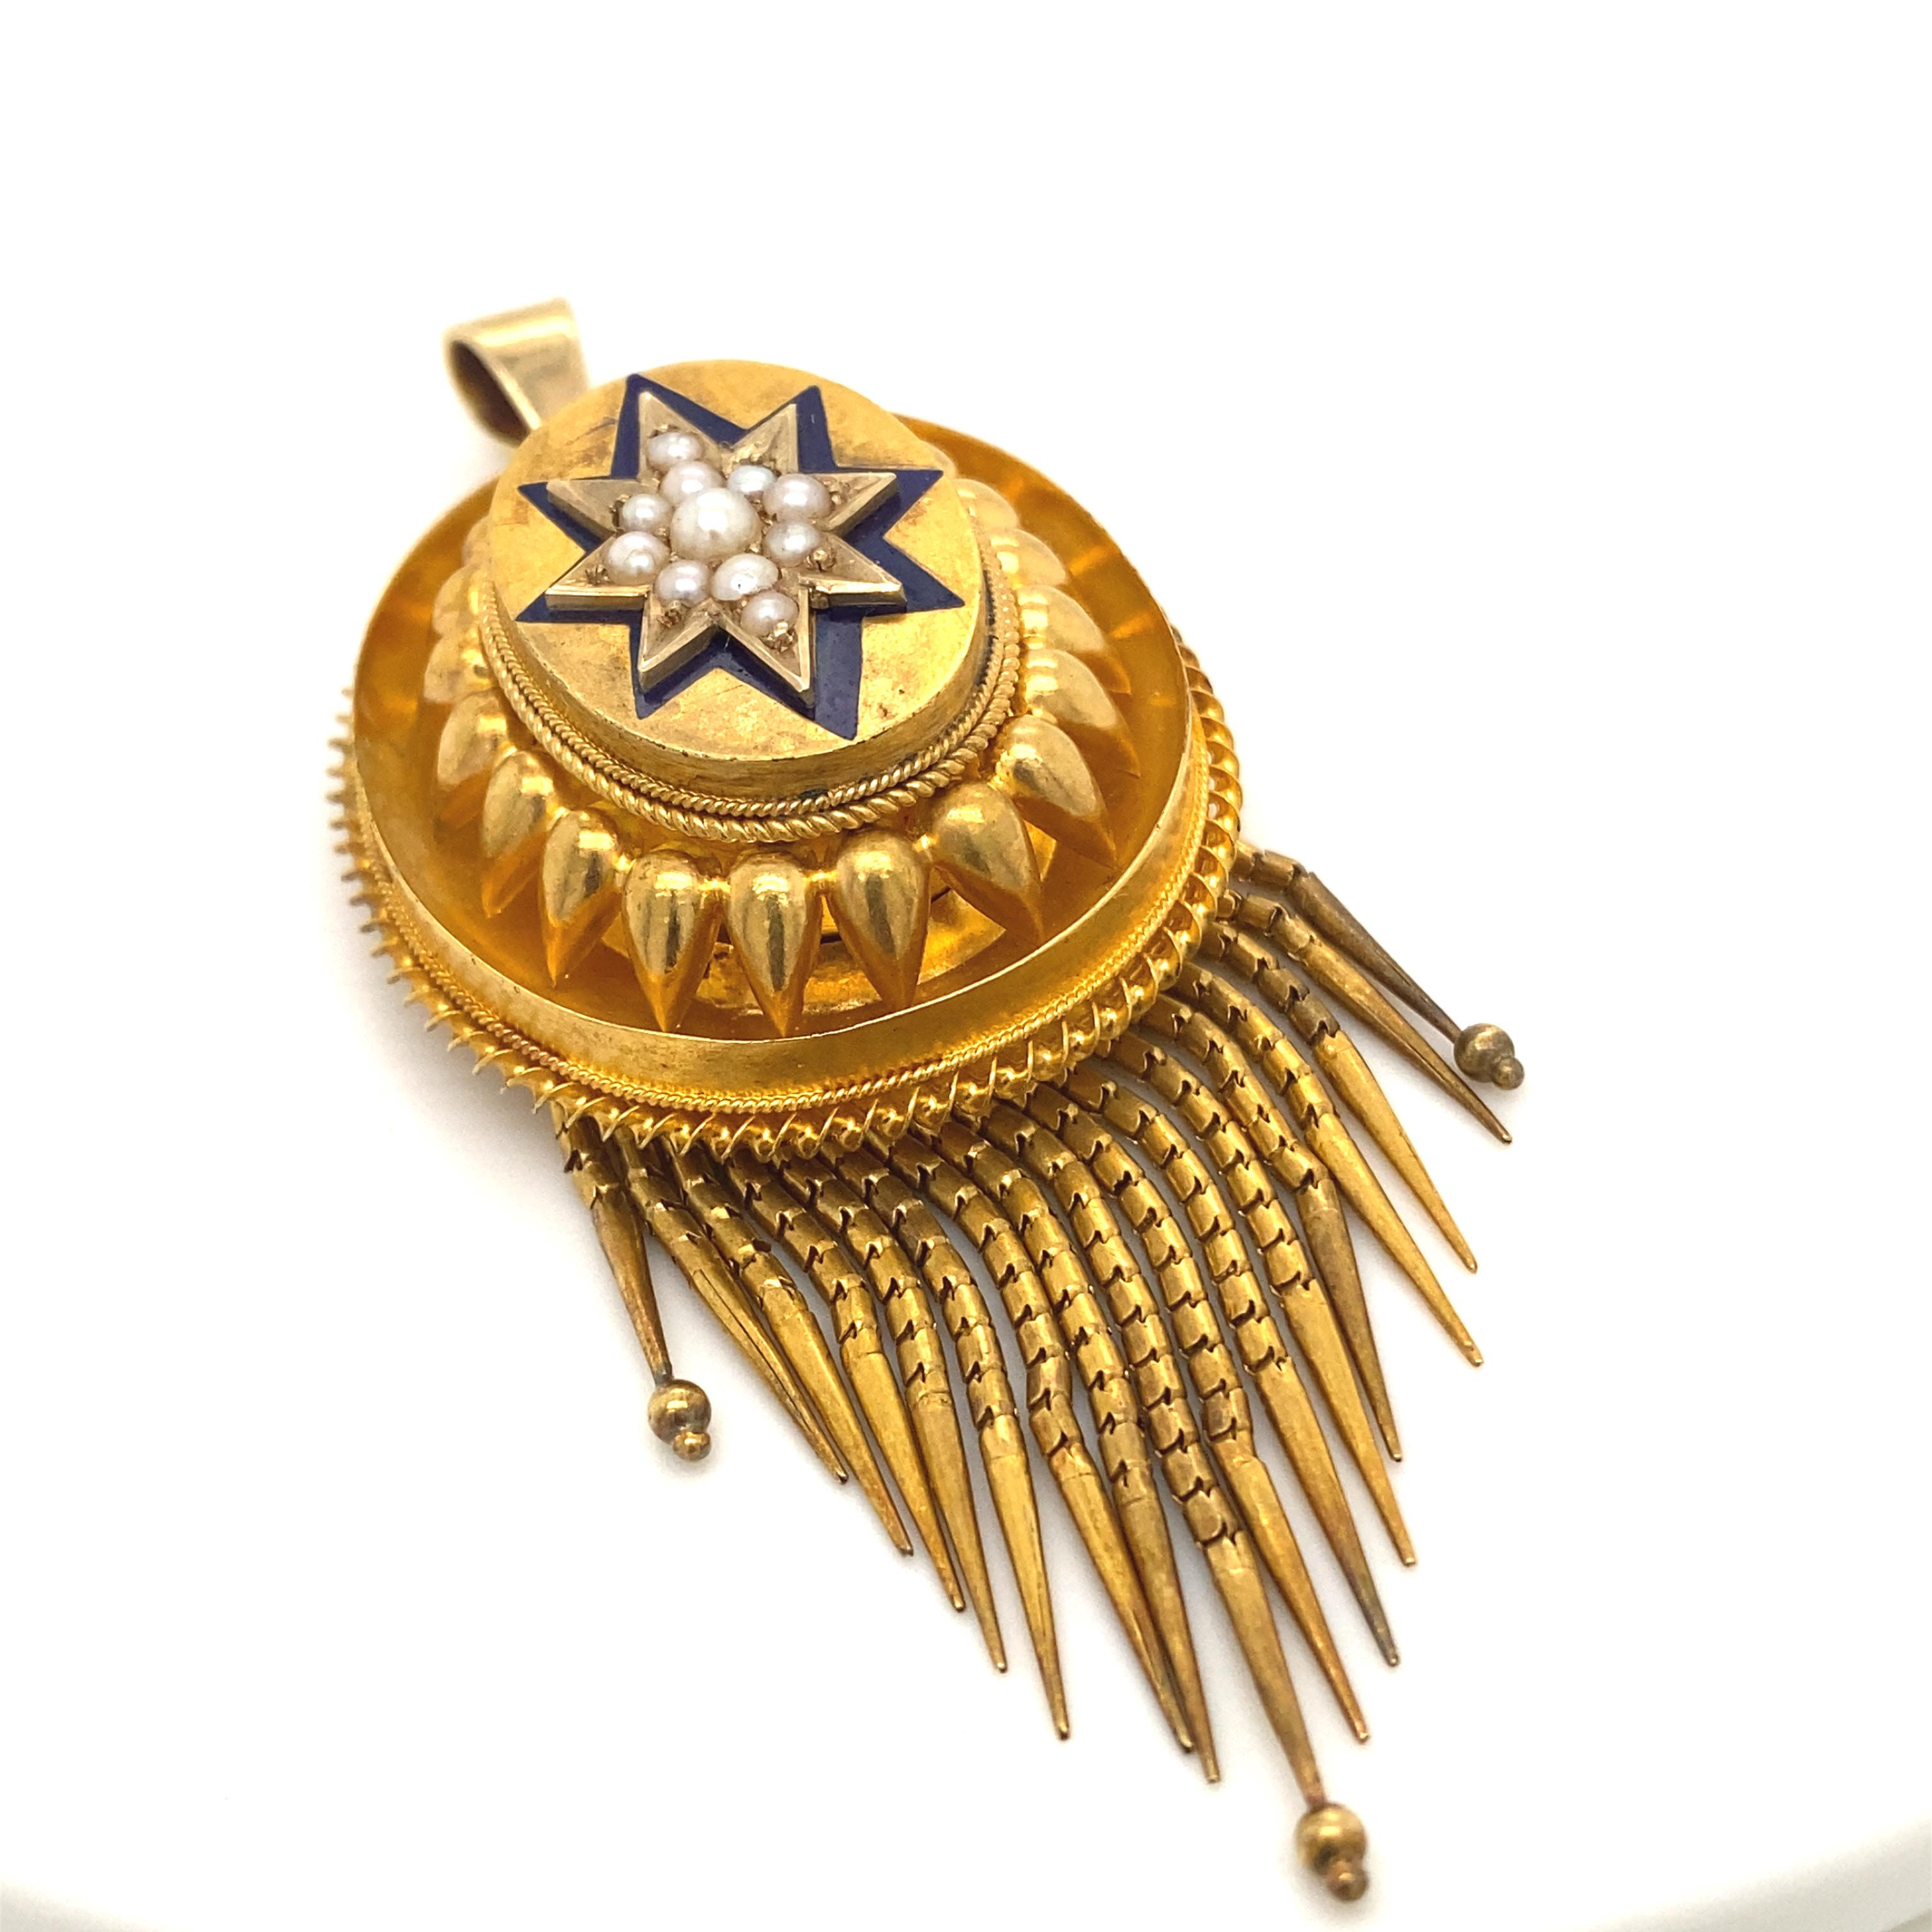 A Victorian pendant in 18 karat yellow gold set with enamel and pearl, circa 1860.

This exquisite Victorian, pendant crafted in yellow gold is in outstanding condition for its age.
Blue enamel work in the form of a star surrounds a cluster of